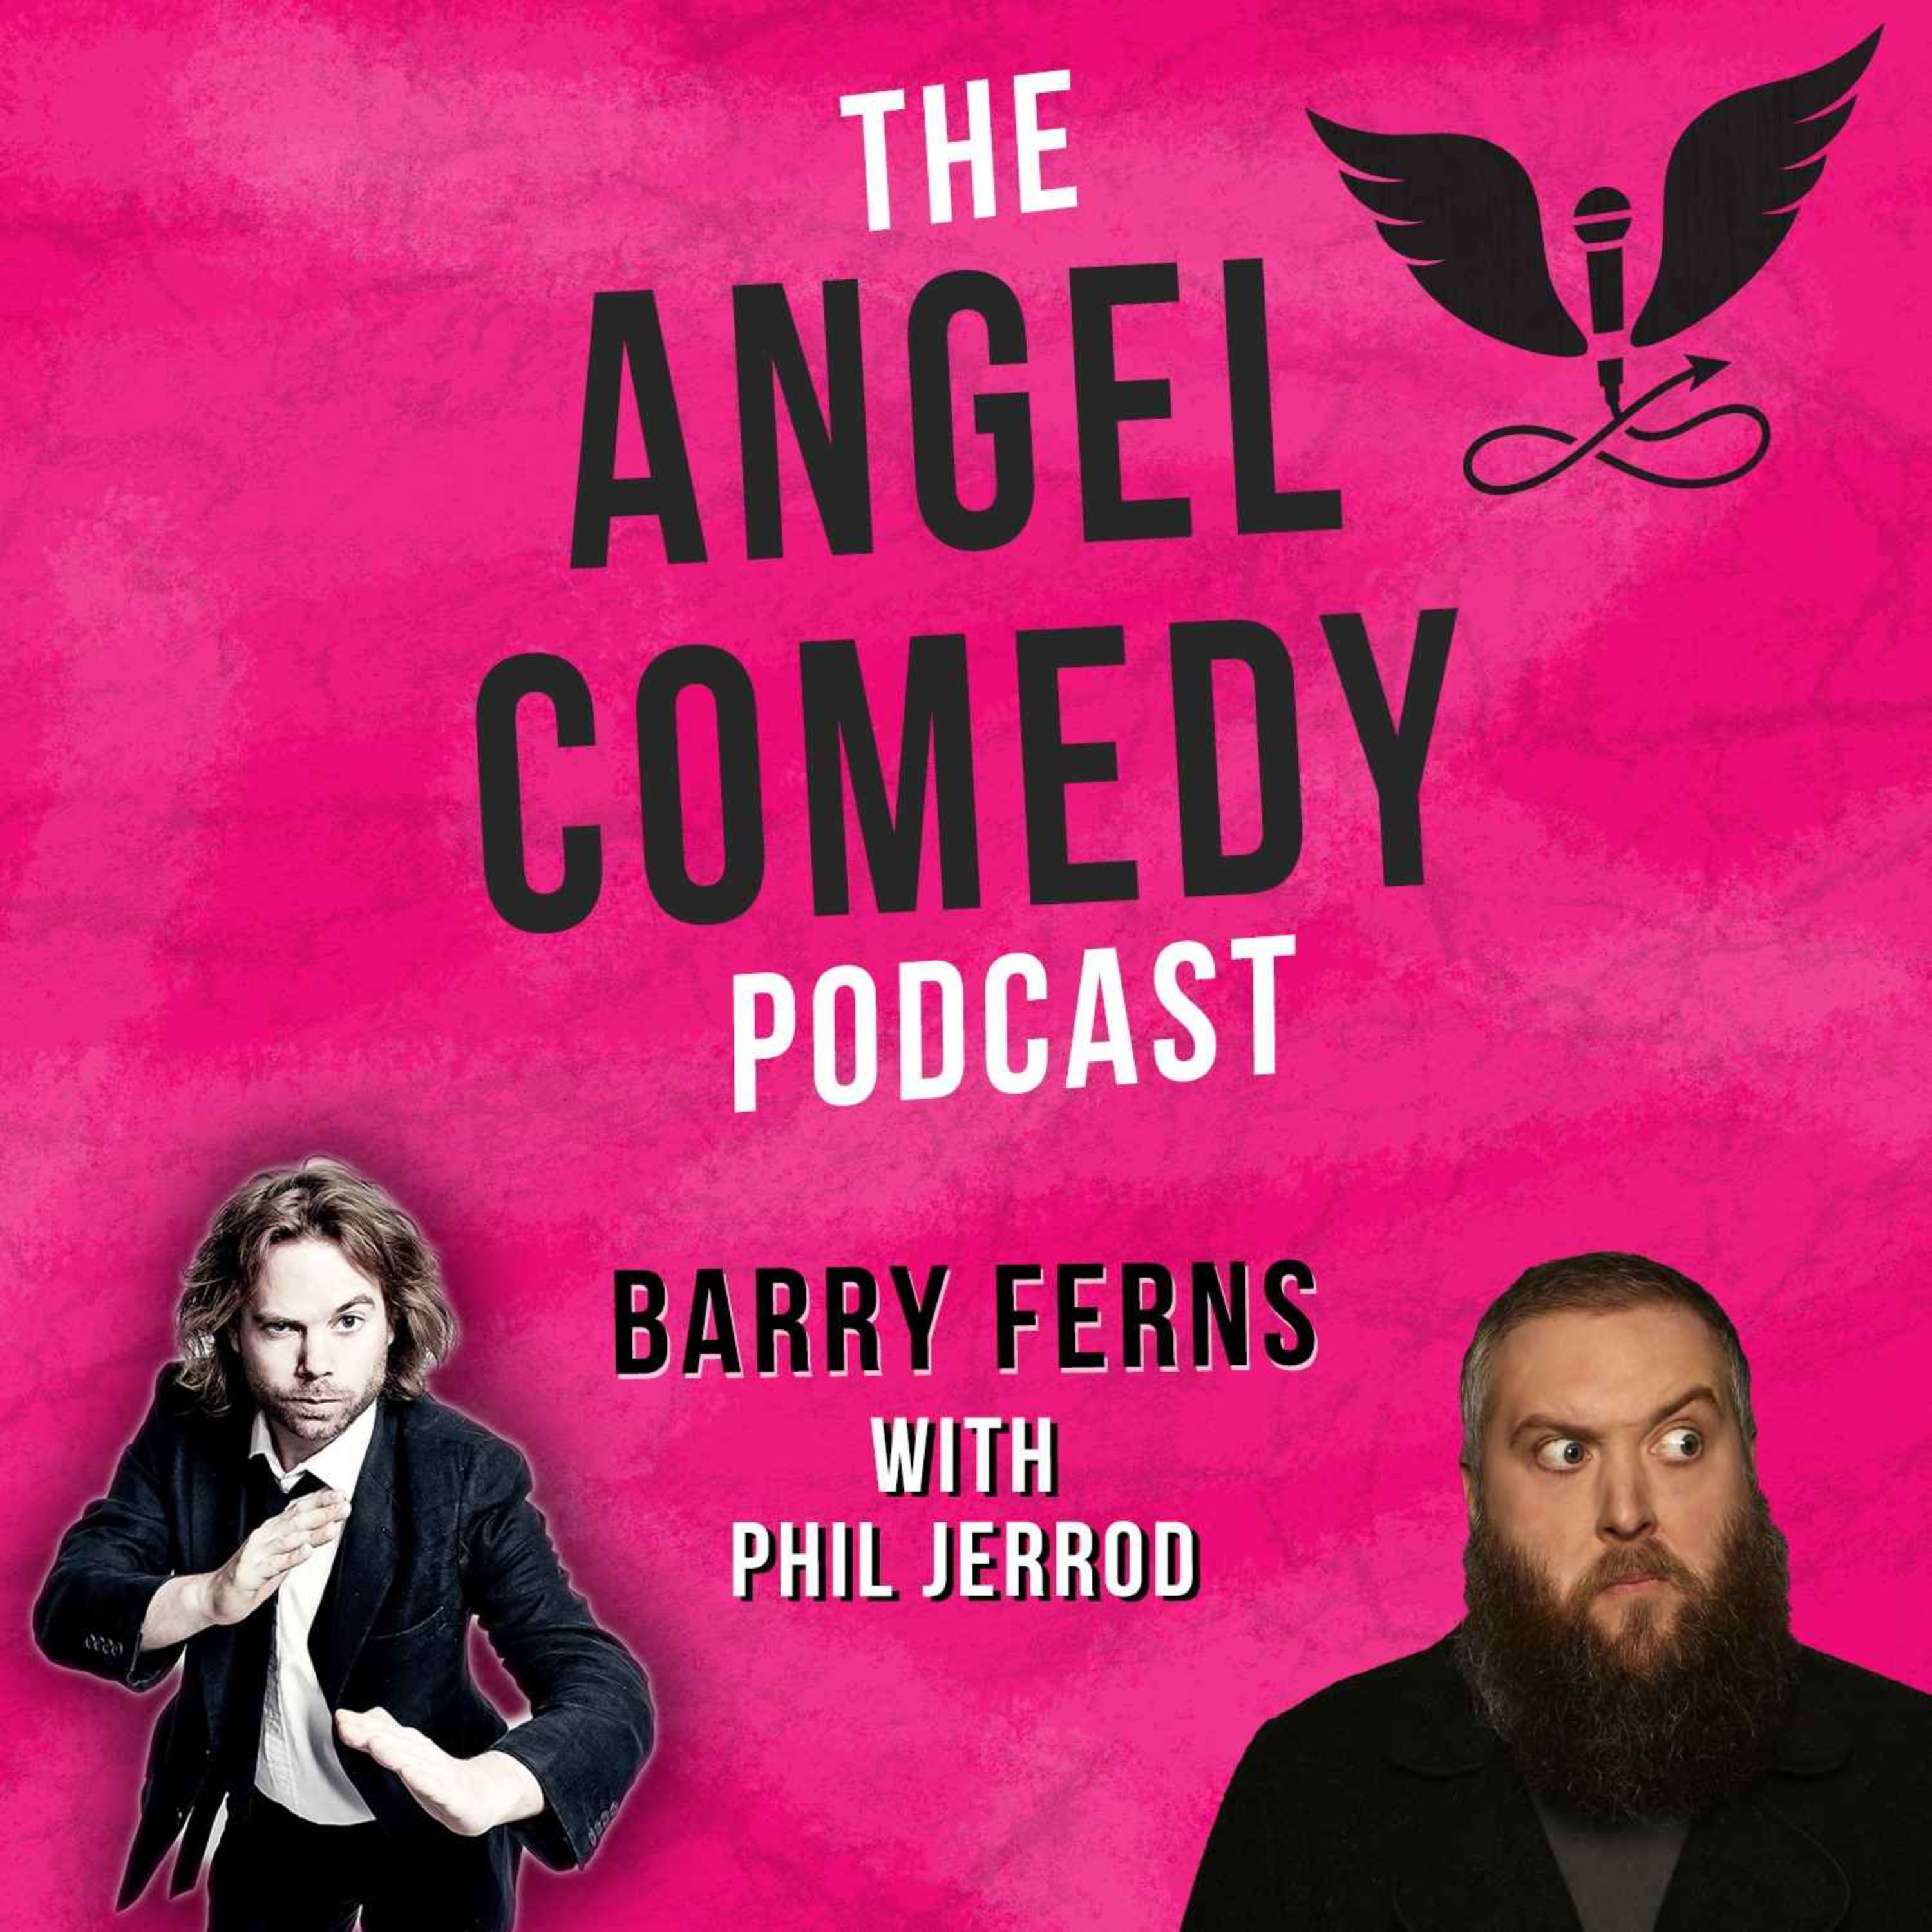 The Angel Comedy Podcast with Phil Jerrod